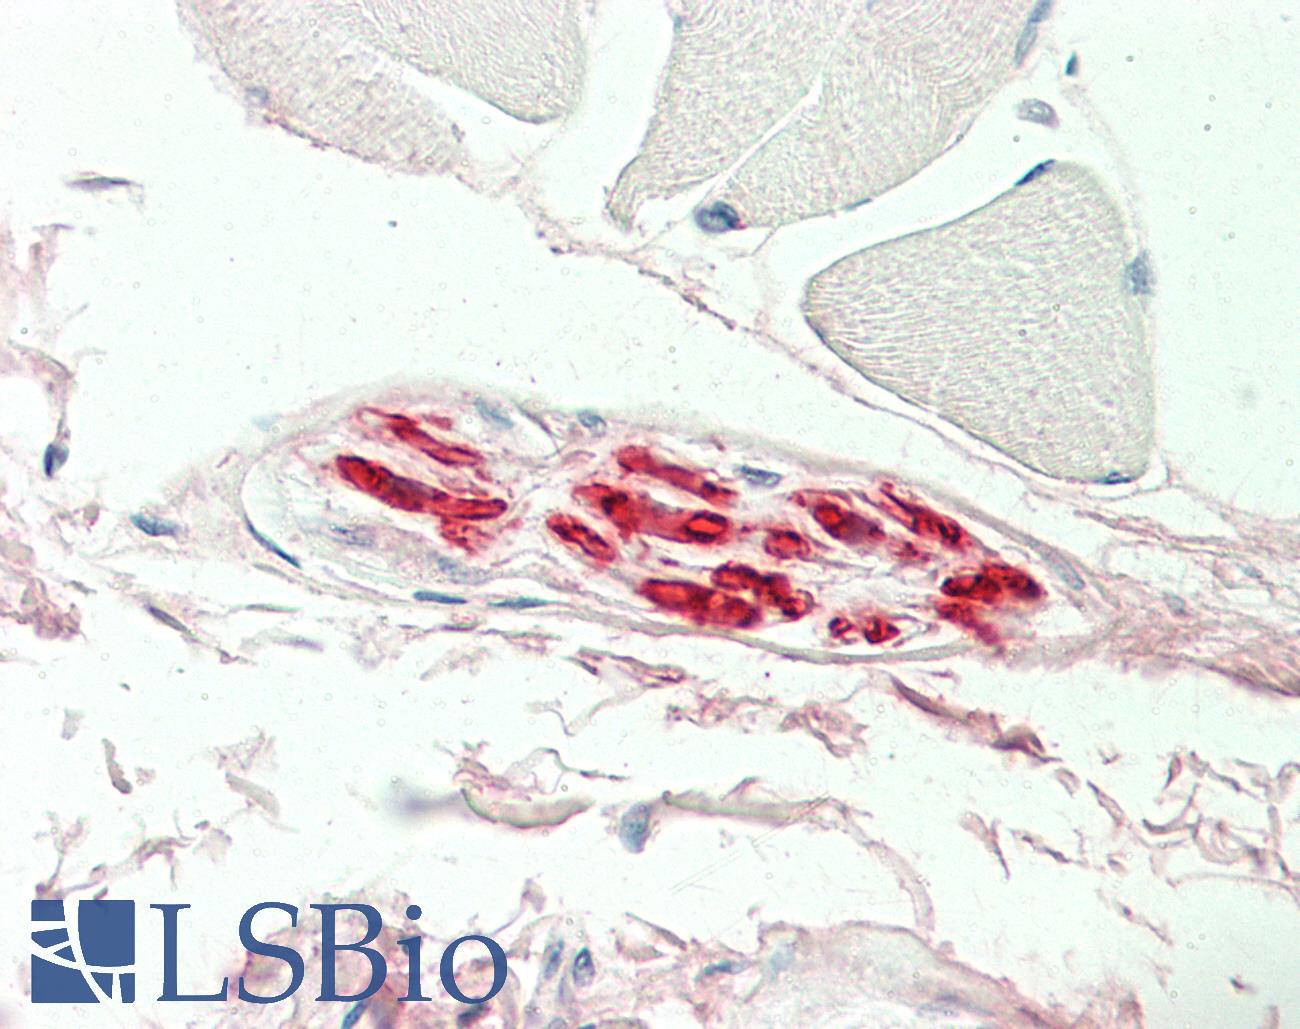 MBP Antibody - Anti-Myelin Basic Protein / MBP antibody IHC staining of human skeletal muscle, nerve. Immunohistochemistry of formalin-fixed, paraffin-embedded tissue after heat-induced antigen retrieval.